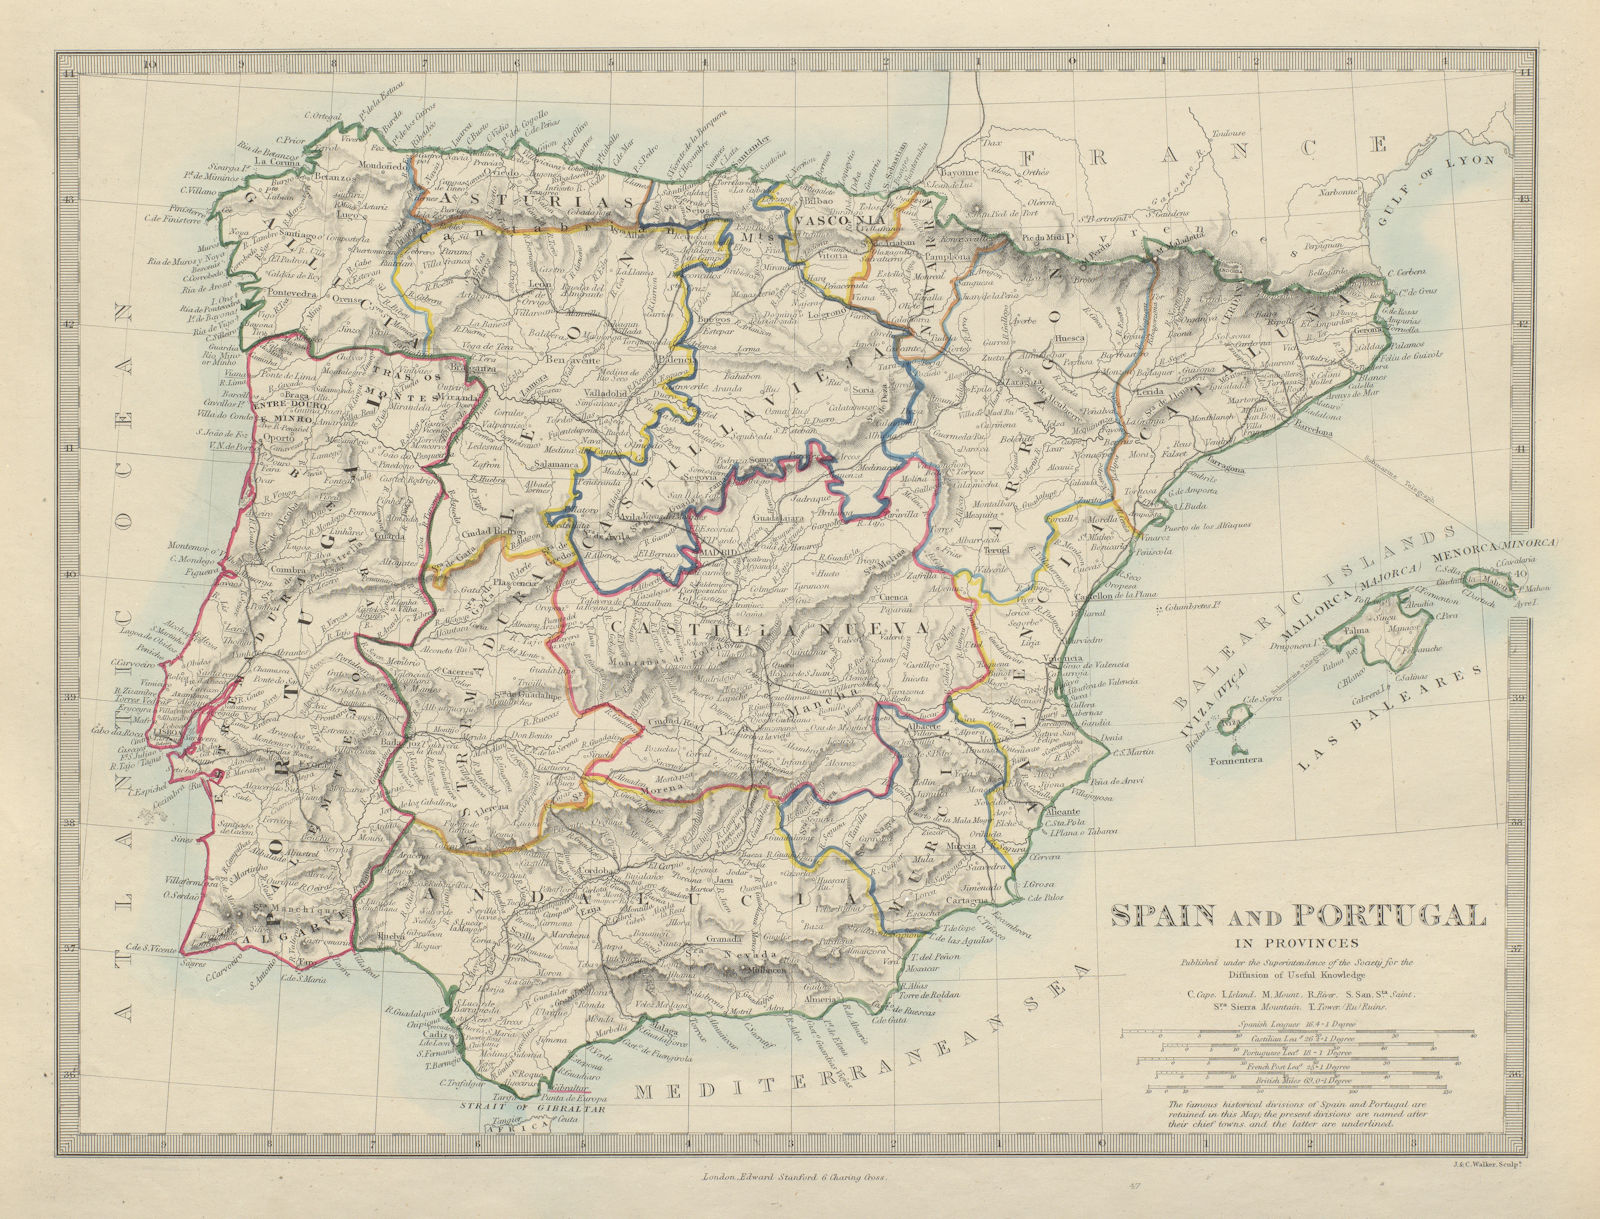 IBERIA. Spain and Portugal showing provinces. SDUK 1874 old antique map chart